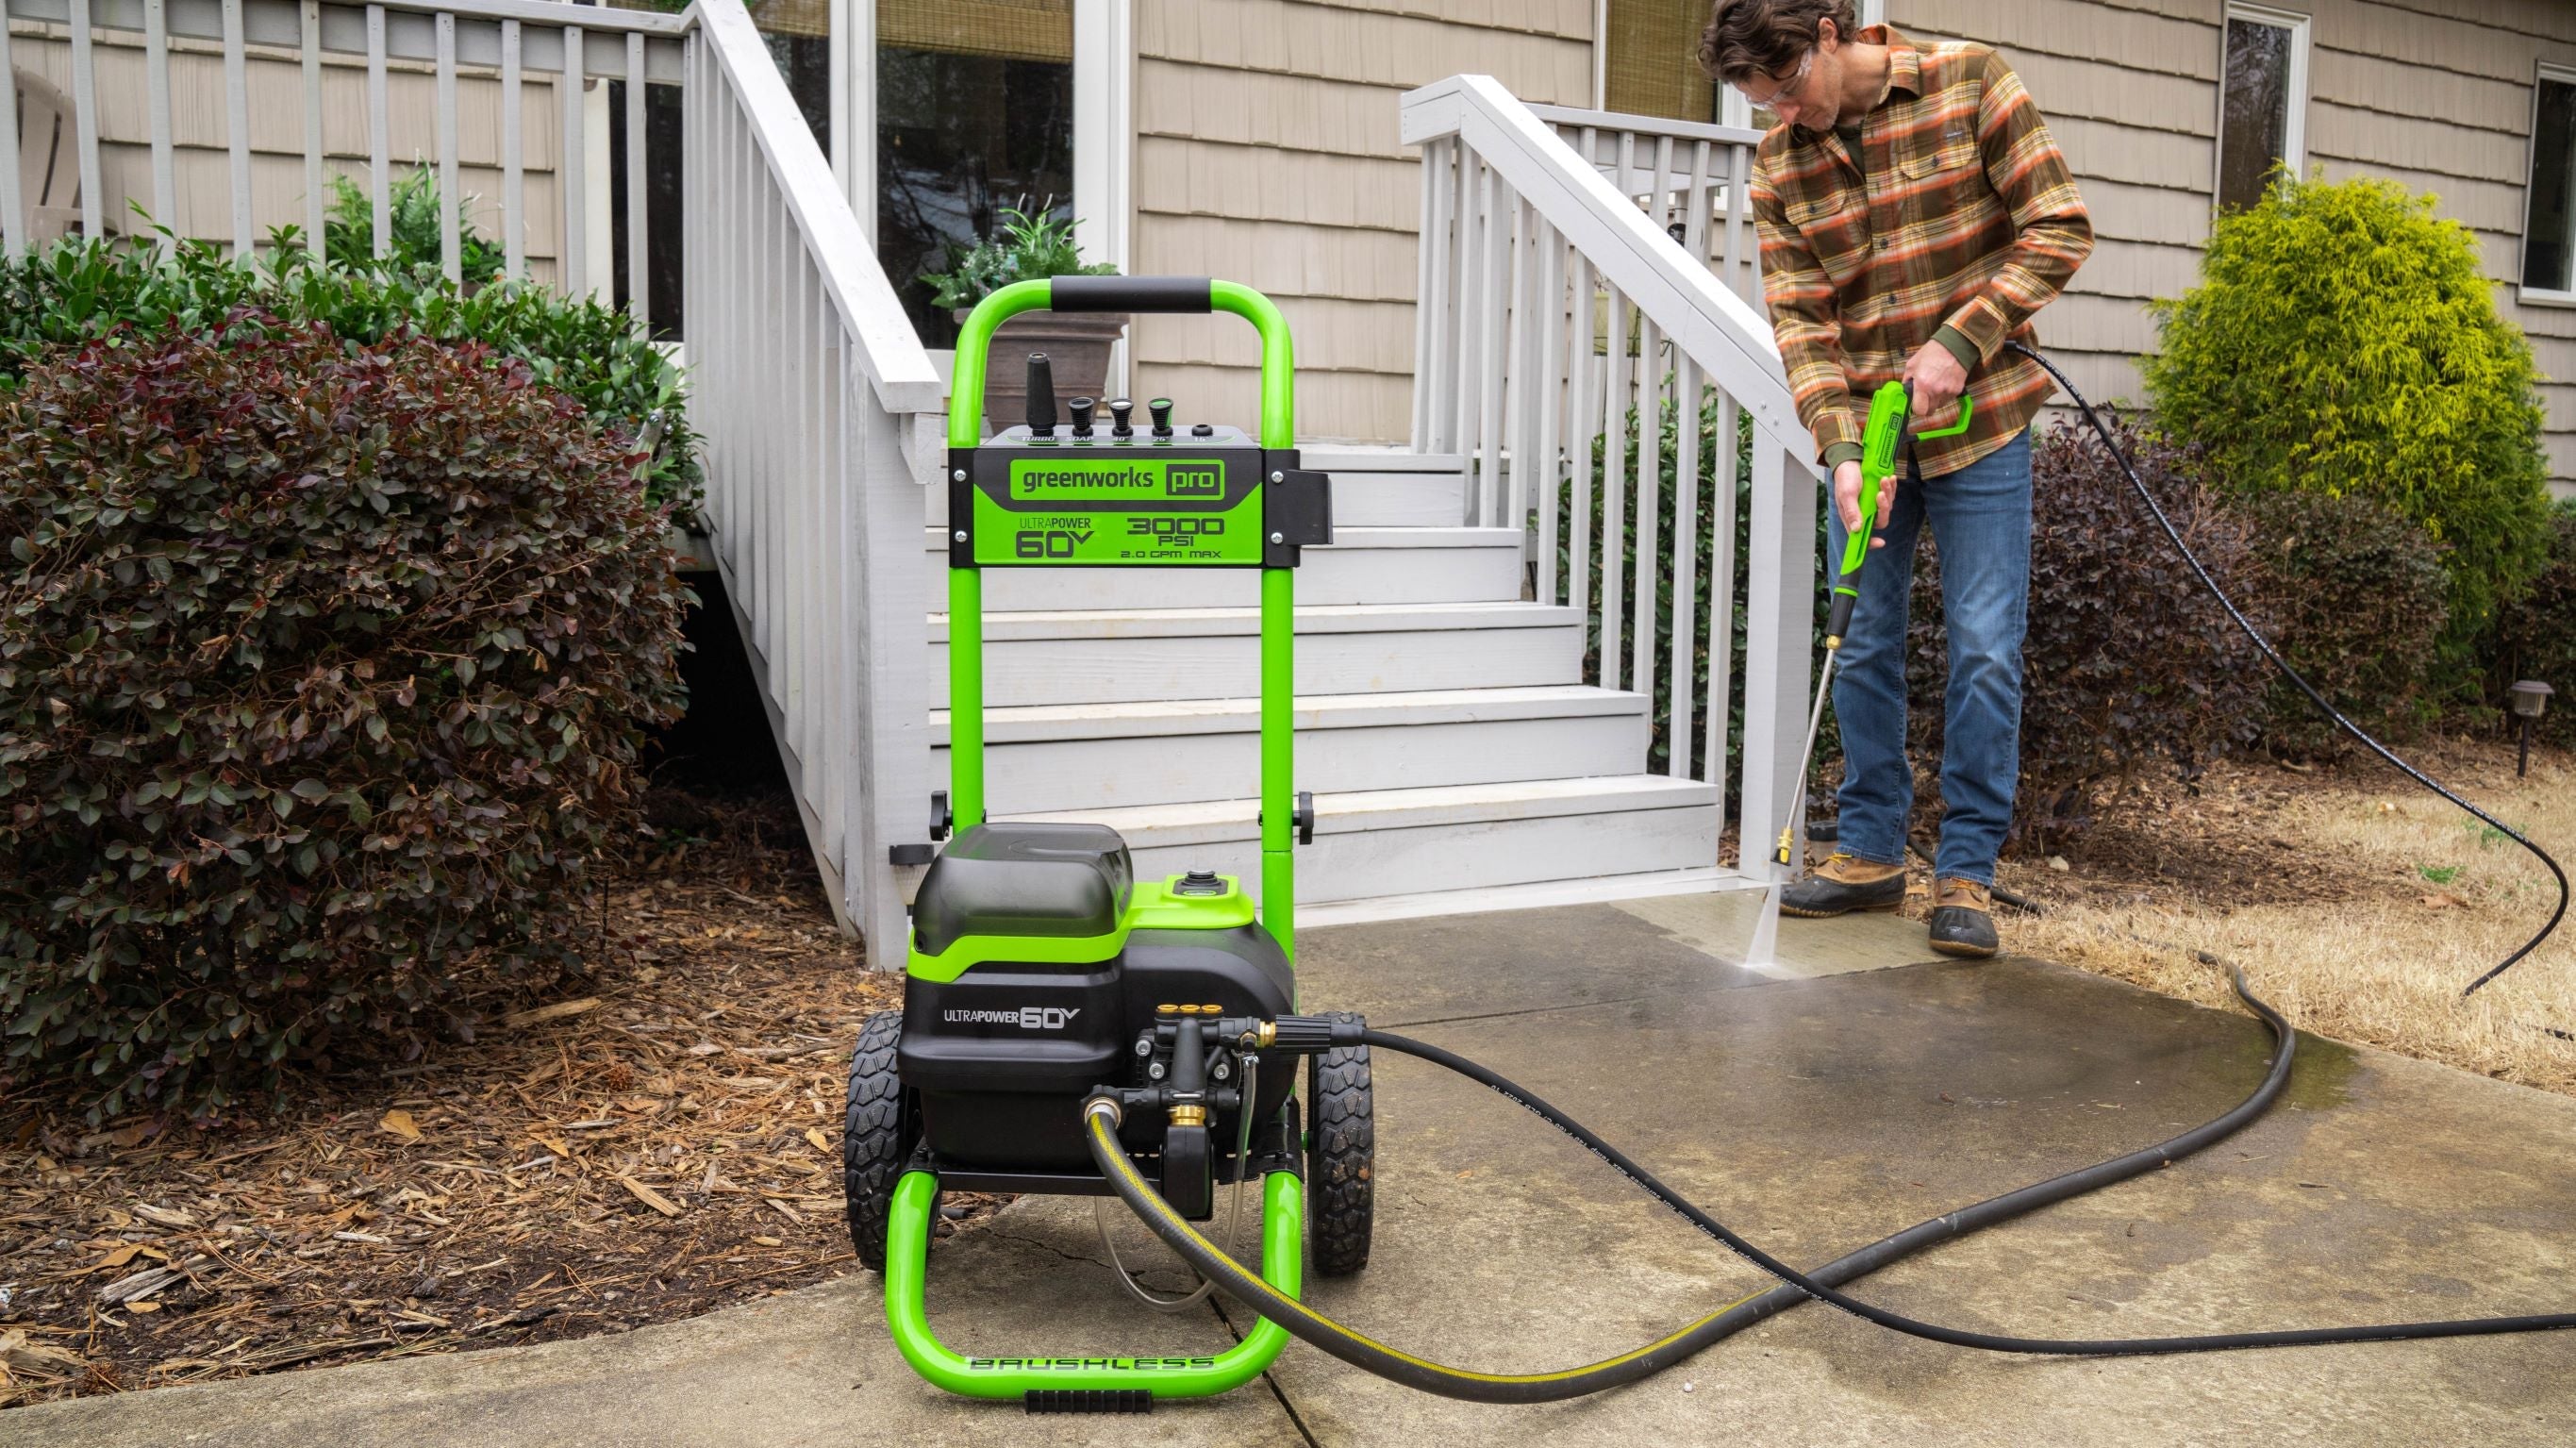 60V 3000 PSI Pressure Washer w/ Foam Cannon and 15" Surface Cleaner Combo Kit w/ (2) 5.0Ah Batteries & Dual Port Charger